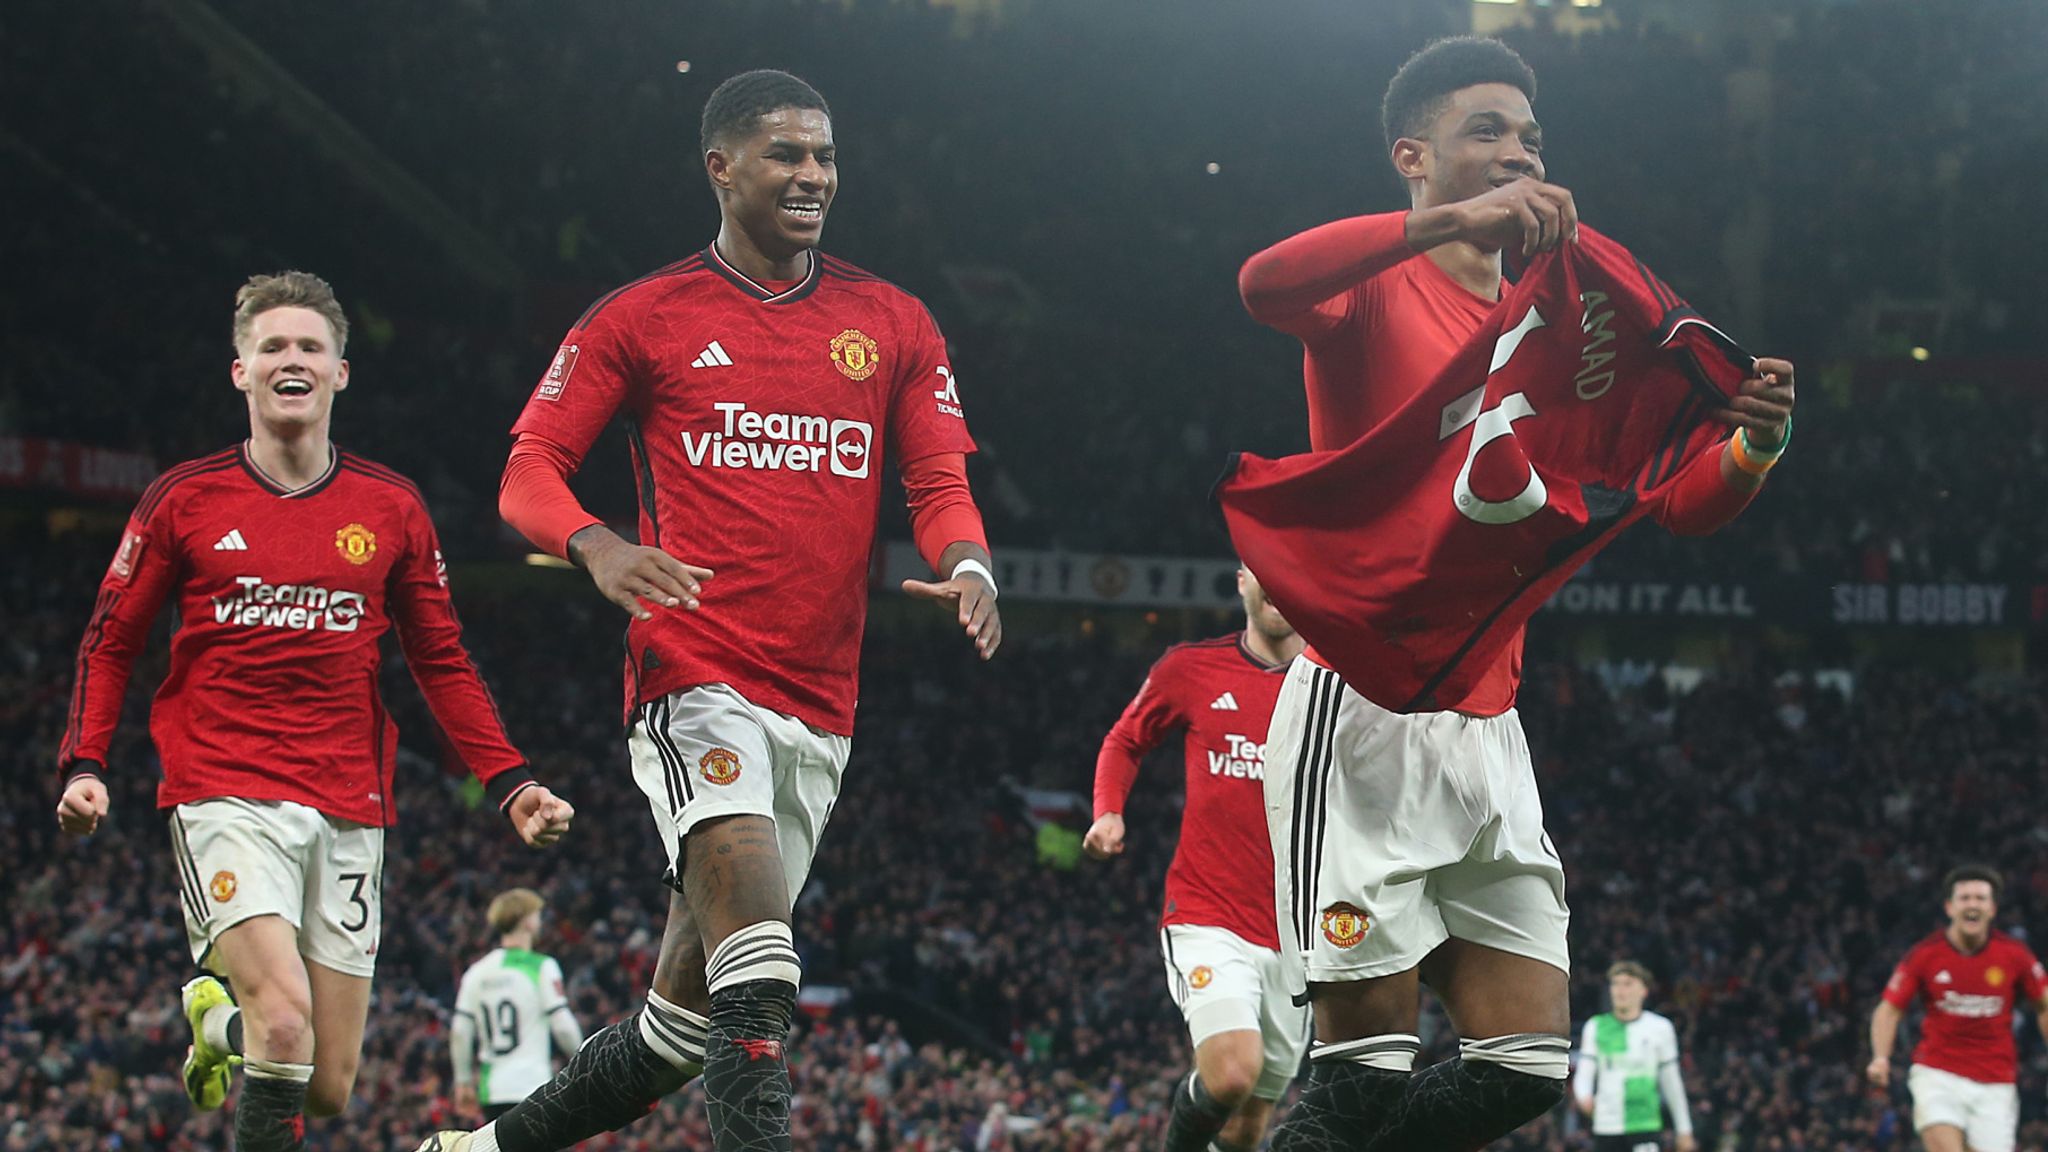 Amad Diallo scored a late winner for Manchester United against Liverpool in the last fixture between the sides.